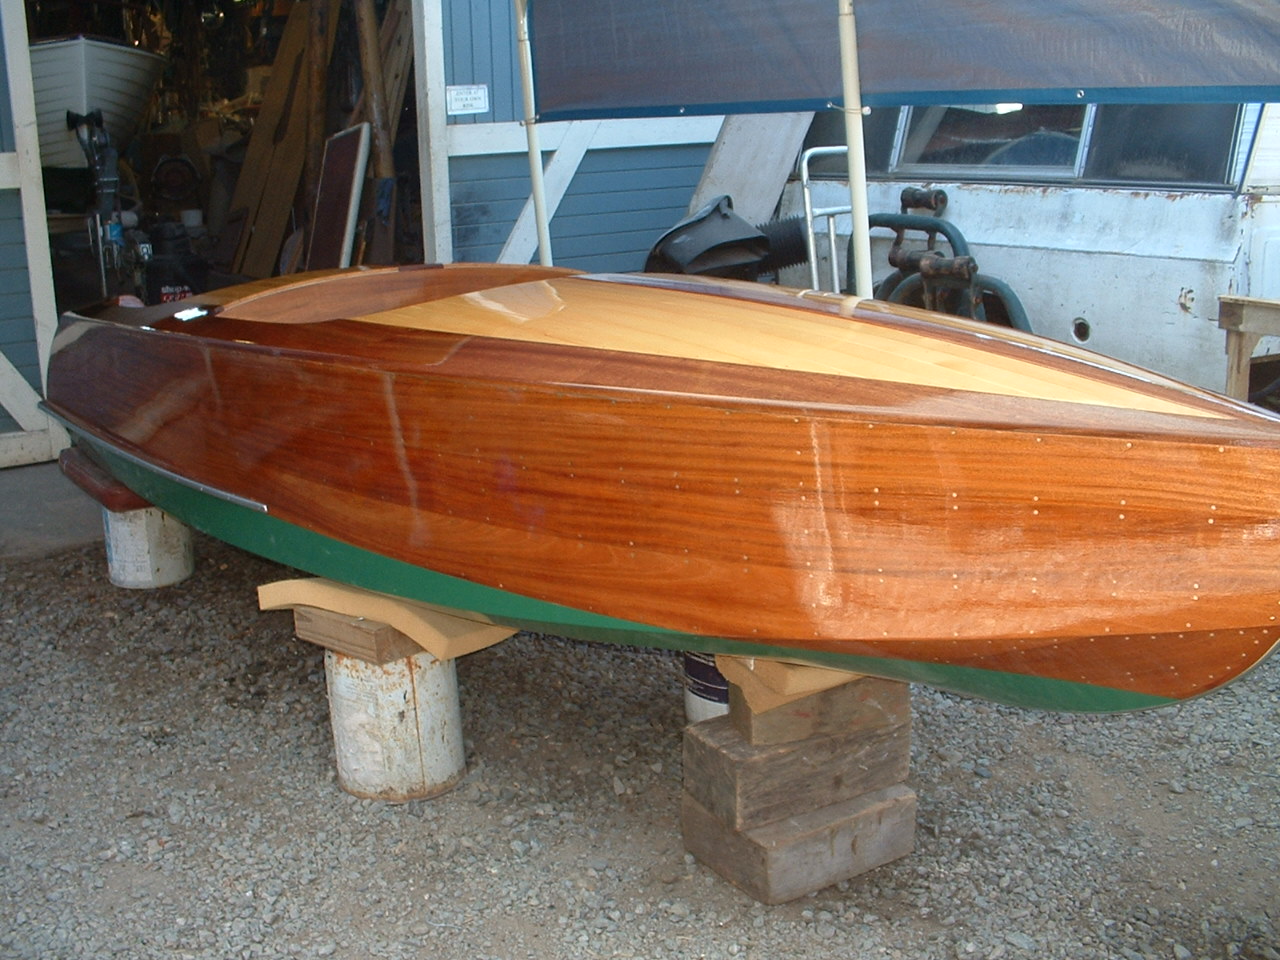 Wooden Boats - DIY Woodworking Projects